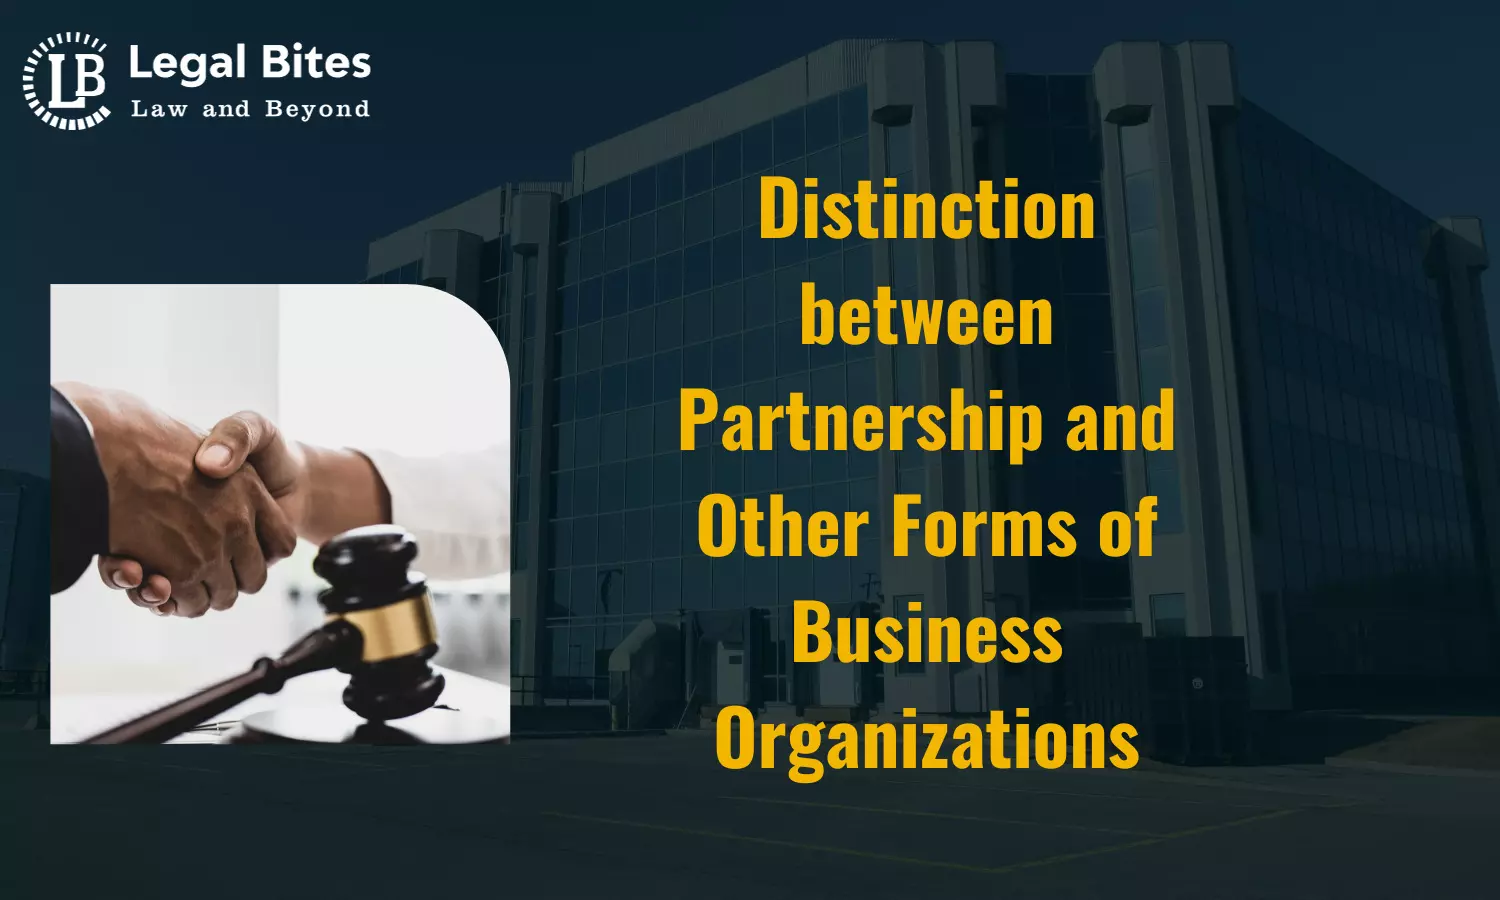 Distinction between Partnership and Other Forms of Business Organizations